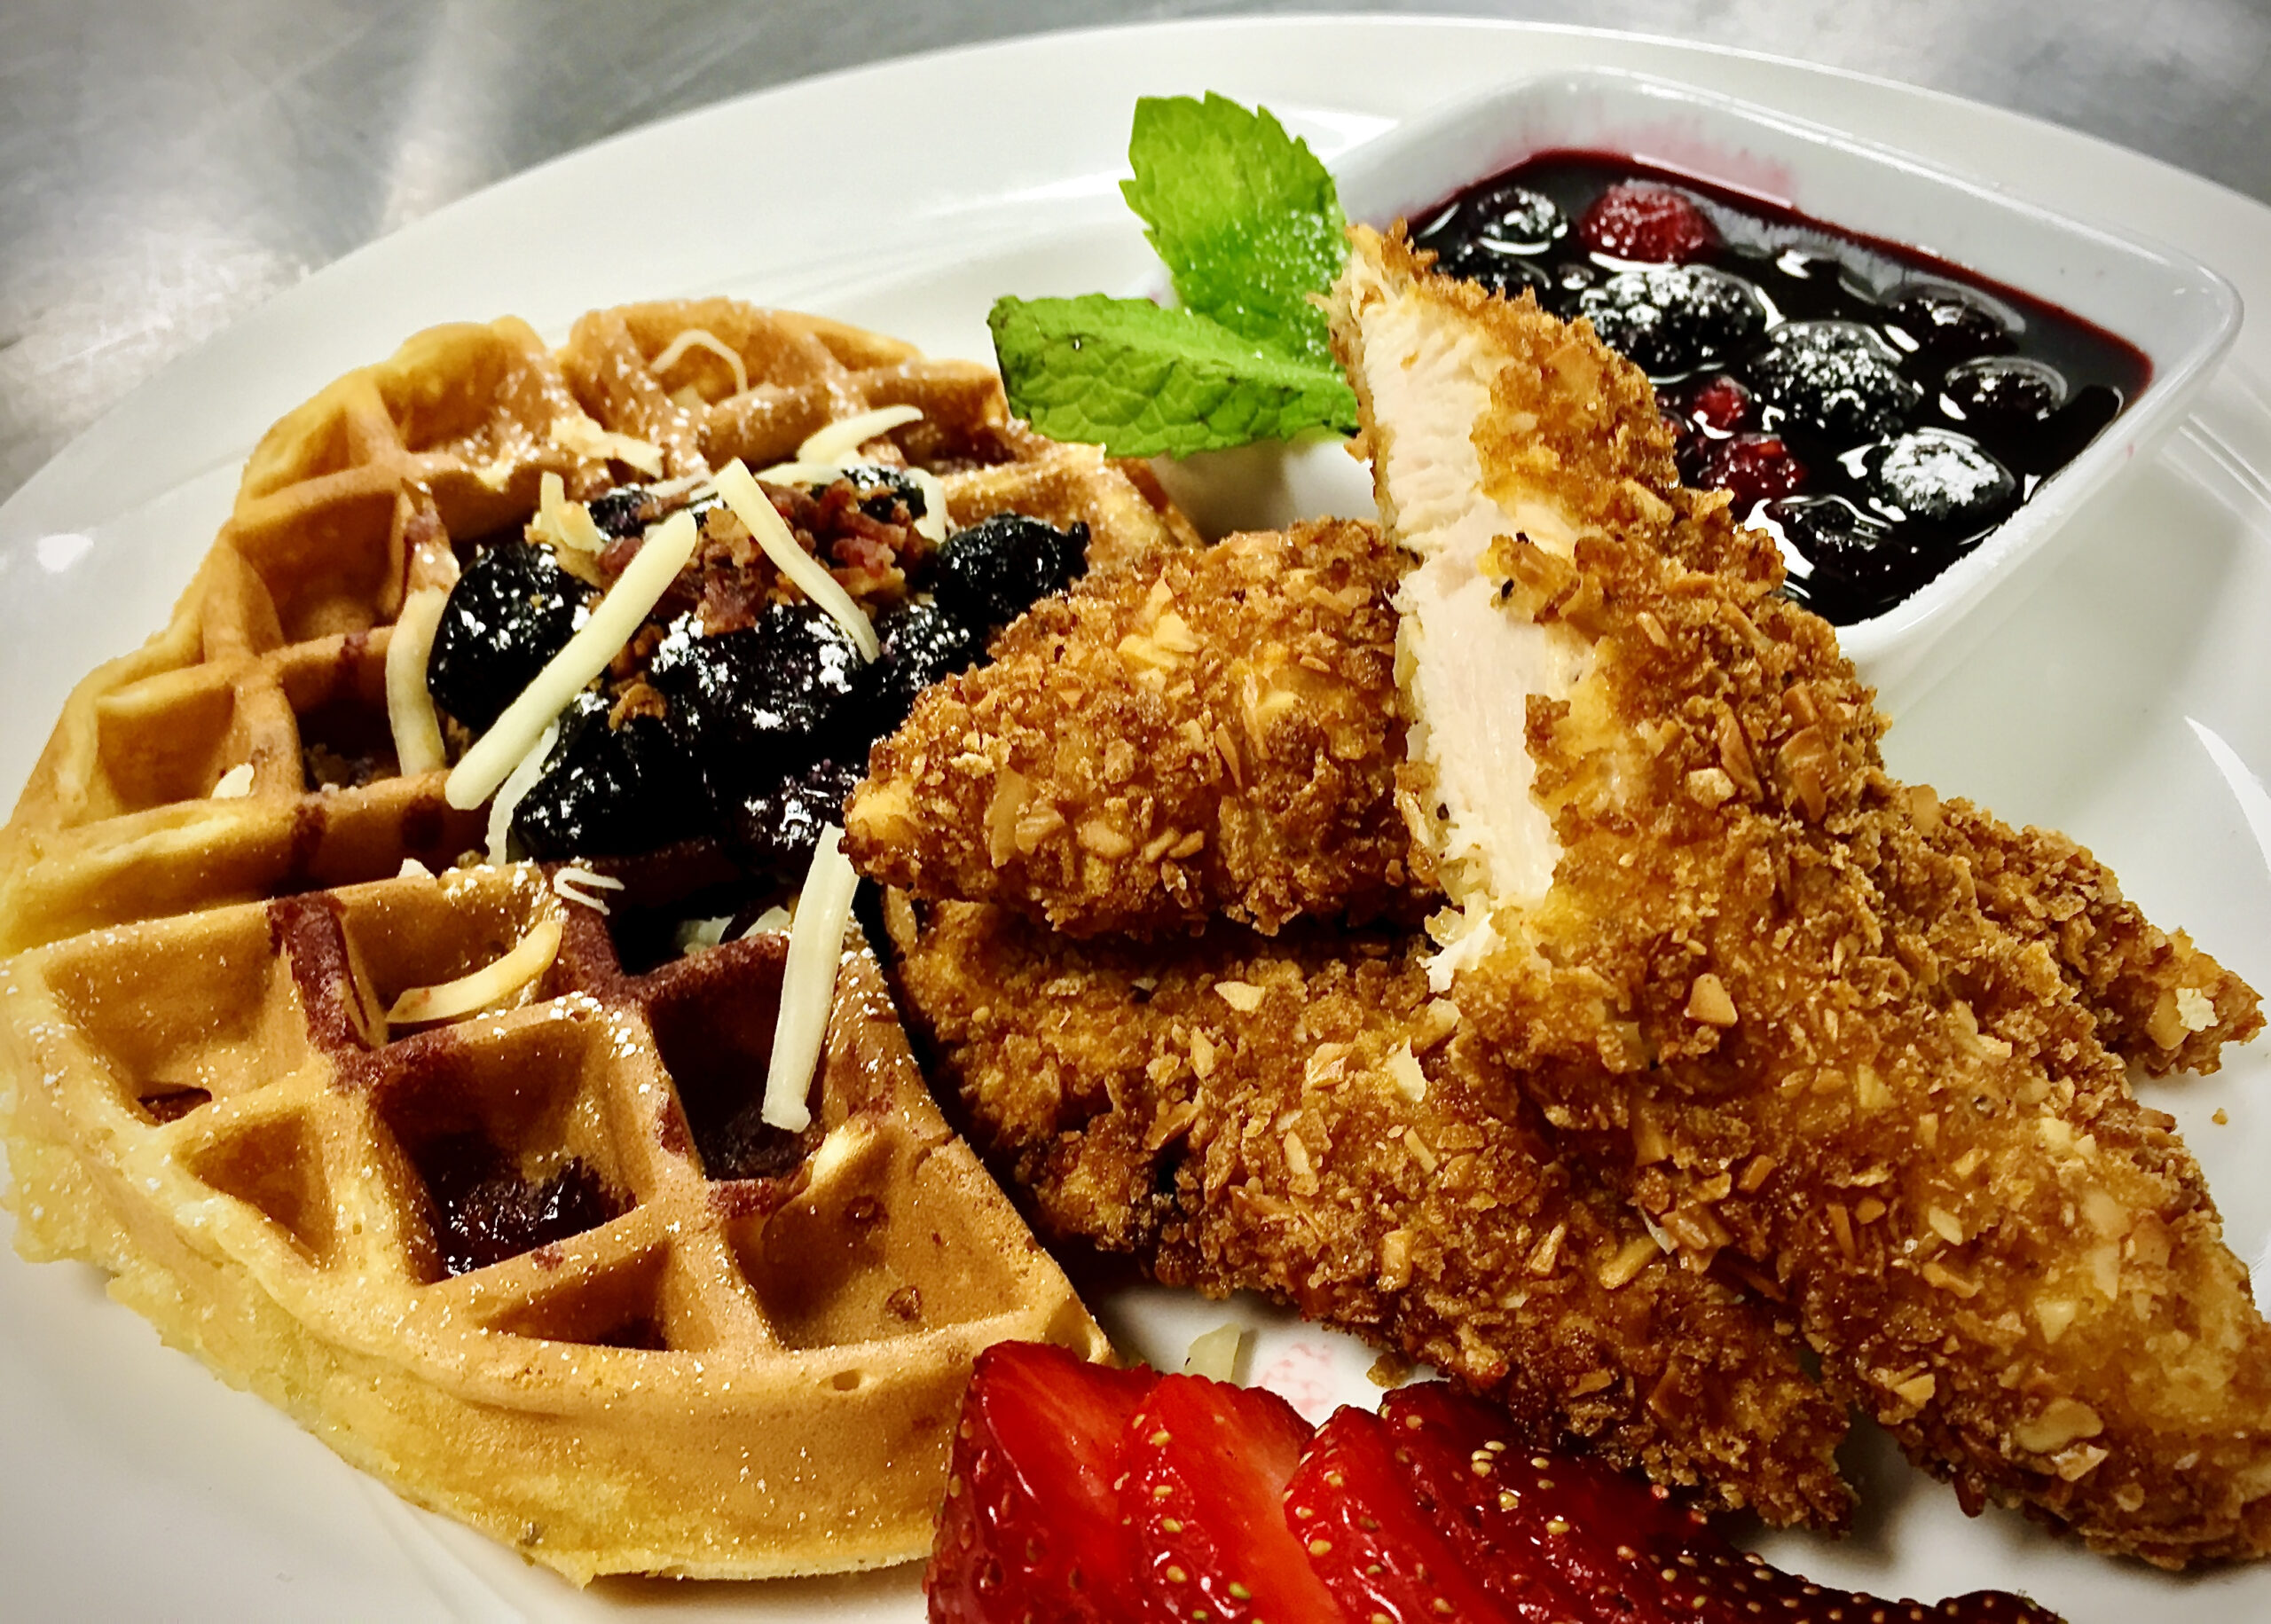 Upscale buttermilk white cheddar cheese waffles fresh from the iron, served with almond and cornflake crusted chicken tenders.Served with dark cherry and blueberry compote